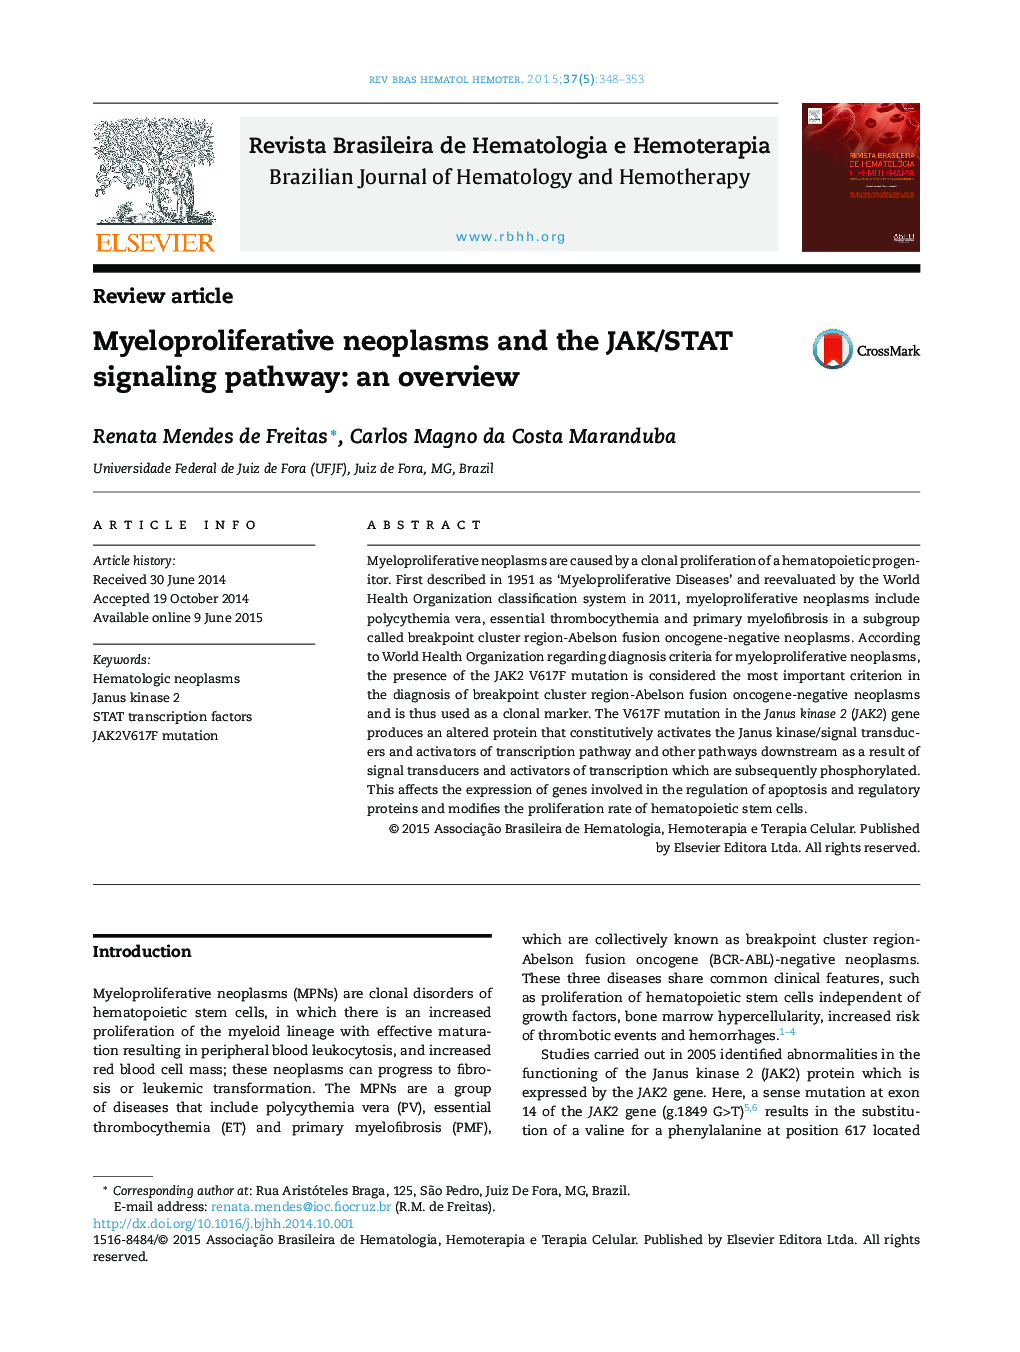 Myeloproliferative neoplasms and the JAK/STAT signaling pathway: an overview